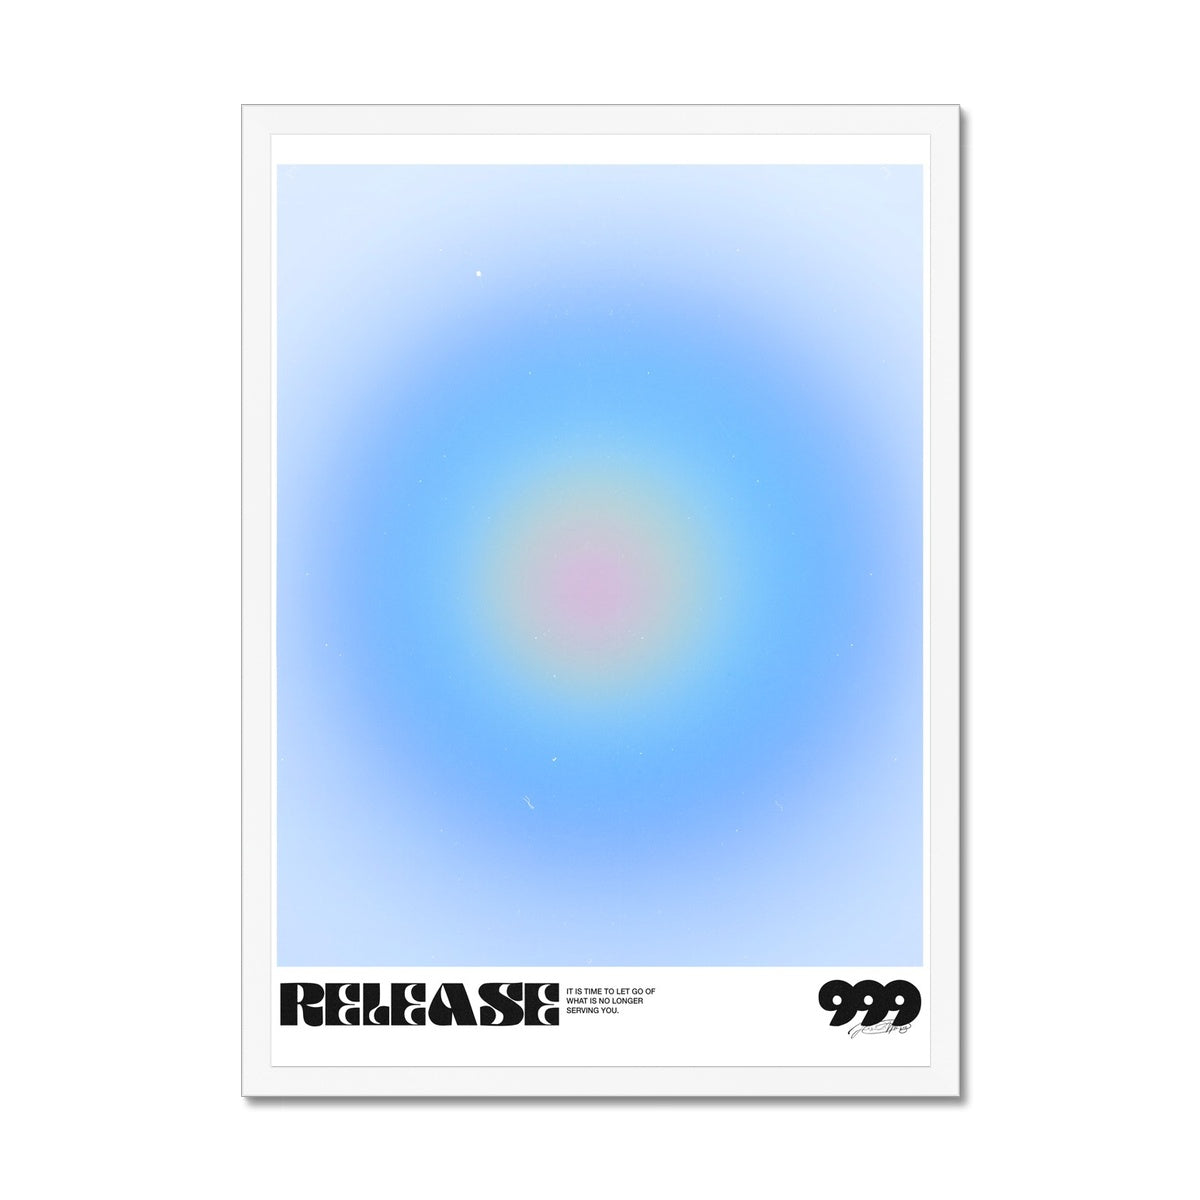 An angel number art print with a gradient aura. Add a touch of angel energy to your walls with a angel number auras. The perfect wall art posters to create a soft and dreamy aesthetic with your apartment or dorm decor. 999 Release: It’s Time To Let Go Of What’s No Longer Serving You.